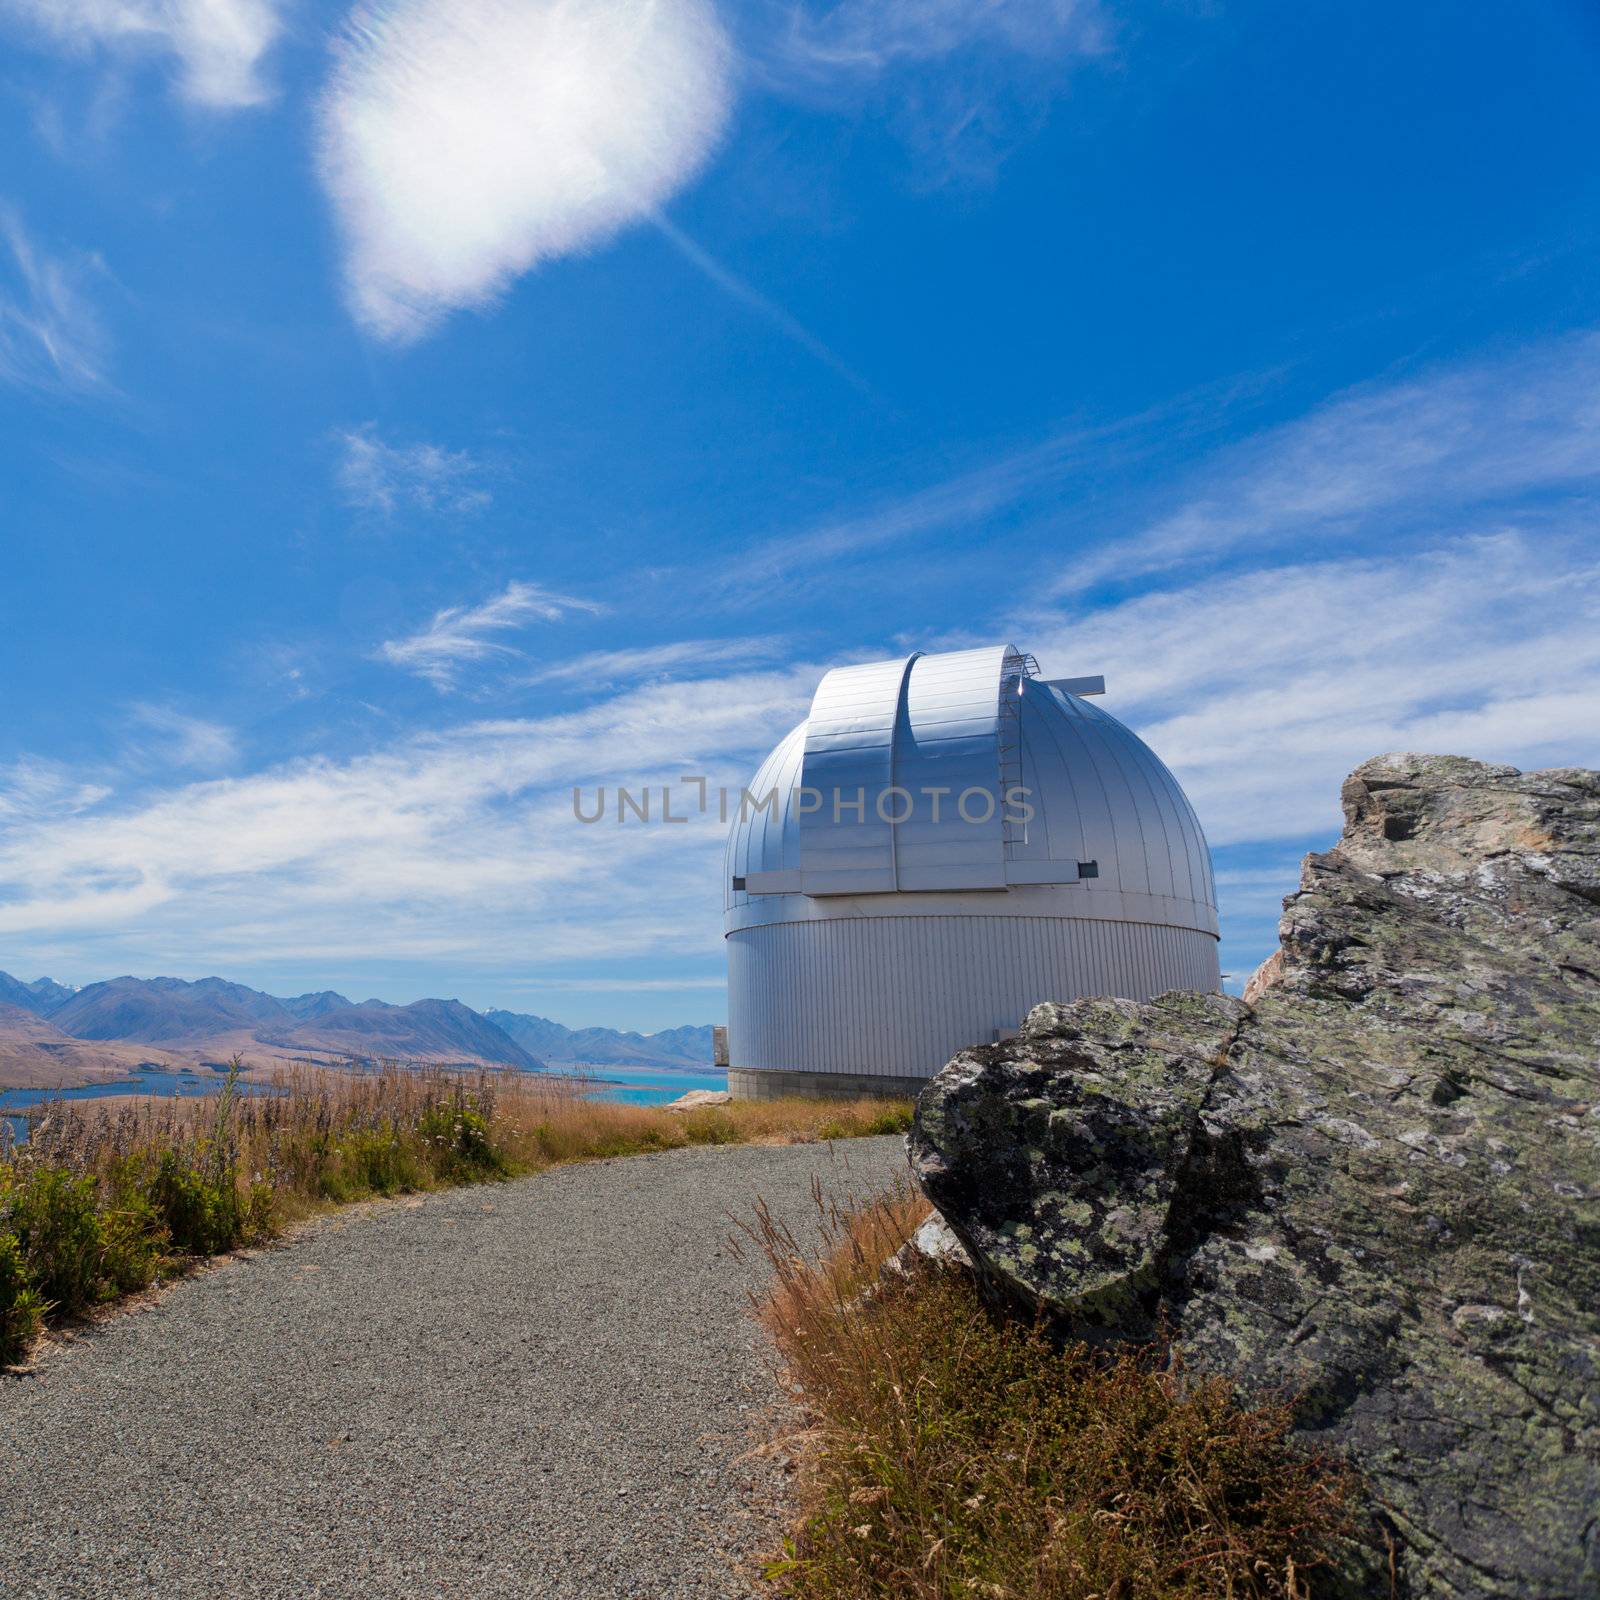 Domed astronomy observatory on mountain top by PiLens